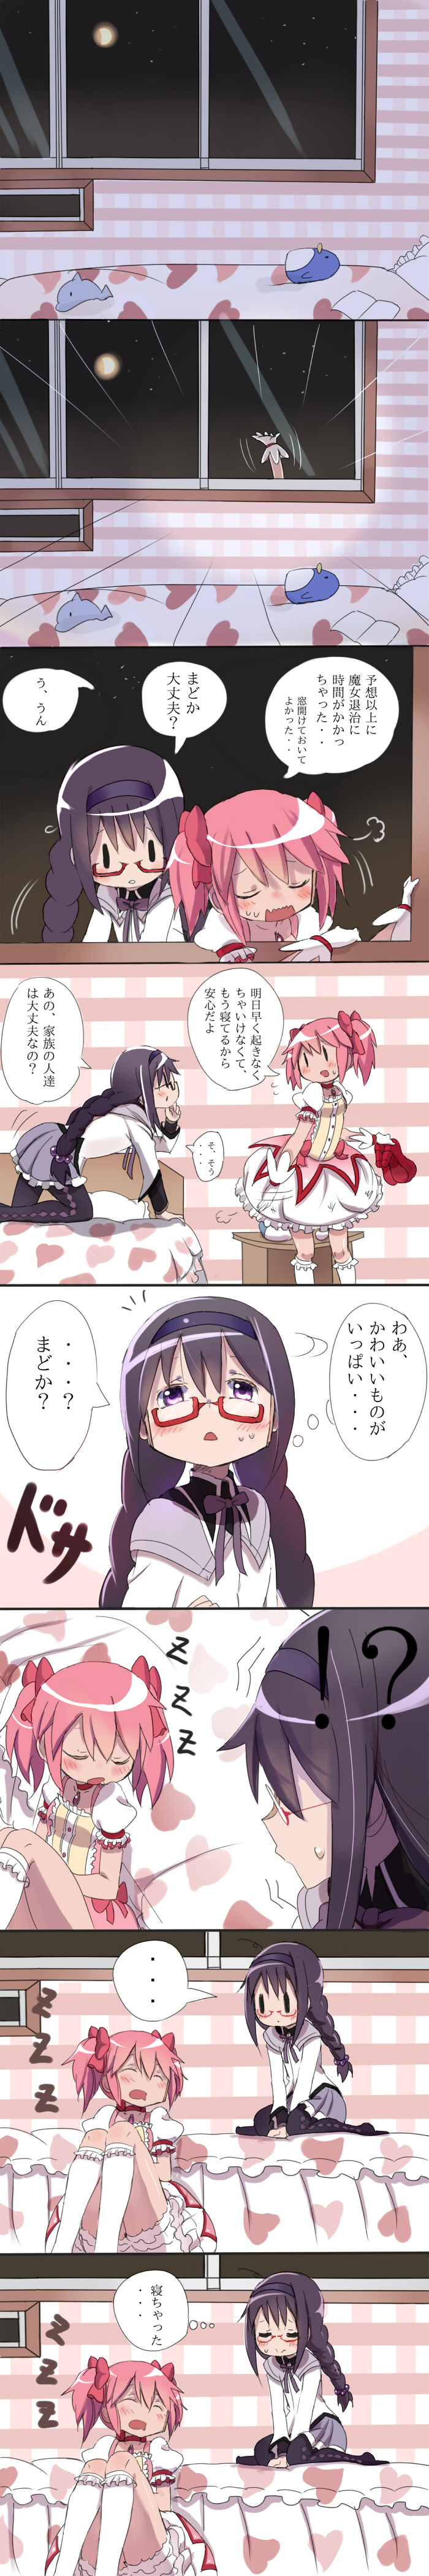 2girls absurdres akemi_homura alknasn bed black_hair braid capelet choker closed_eyes comic glasses gloves hairband highres kaname_madoka kneehighs long_hair long_image magical_girl mahou_shoujo_madoka_magica multiple_girls open_mouth pantyhose pink_hair pleated_skirt red_shoes shoes skirt sleeping tall_image through_window twin_braids twintails violet_eyes white_gloves zzz